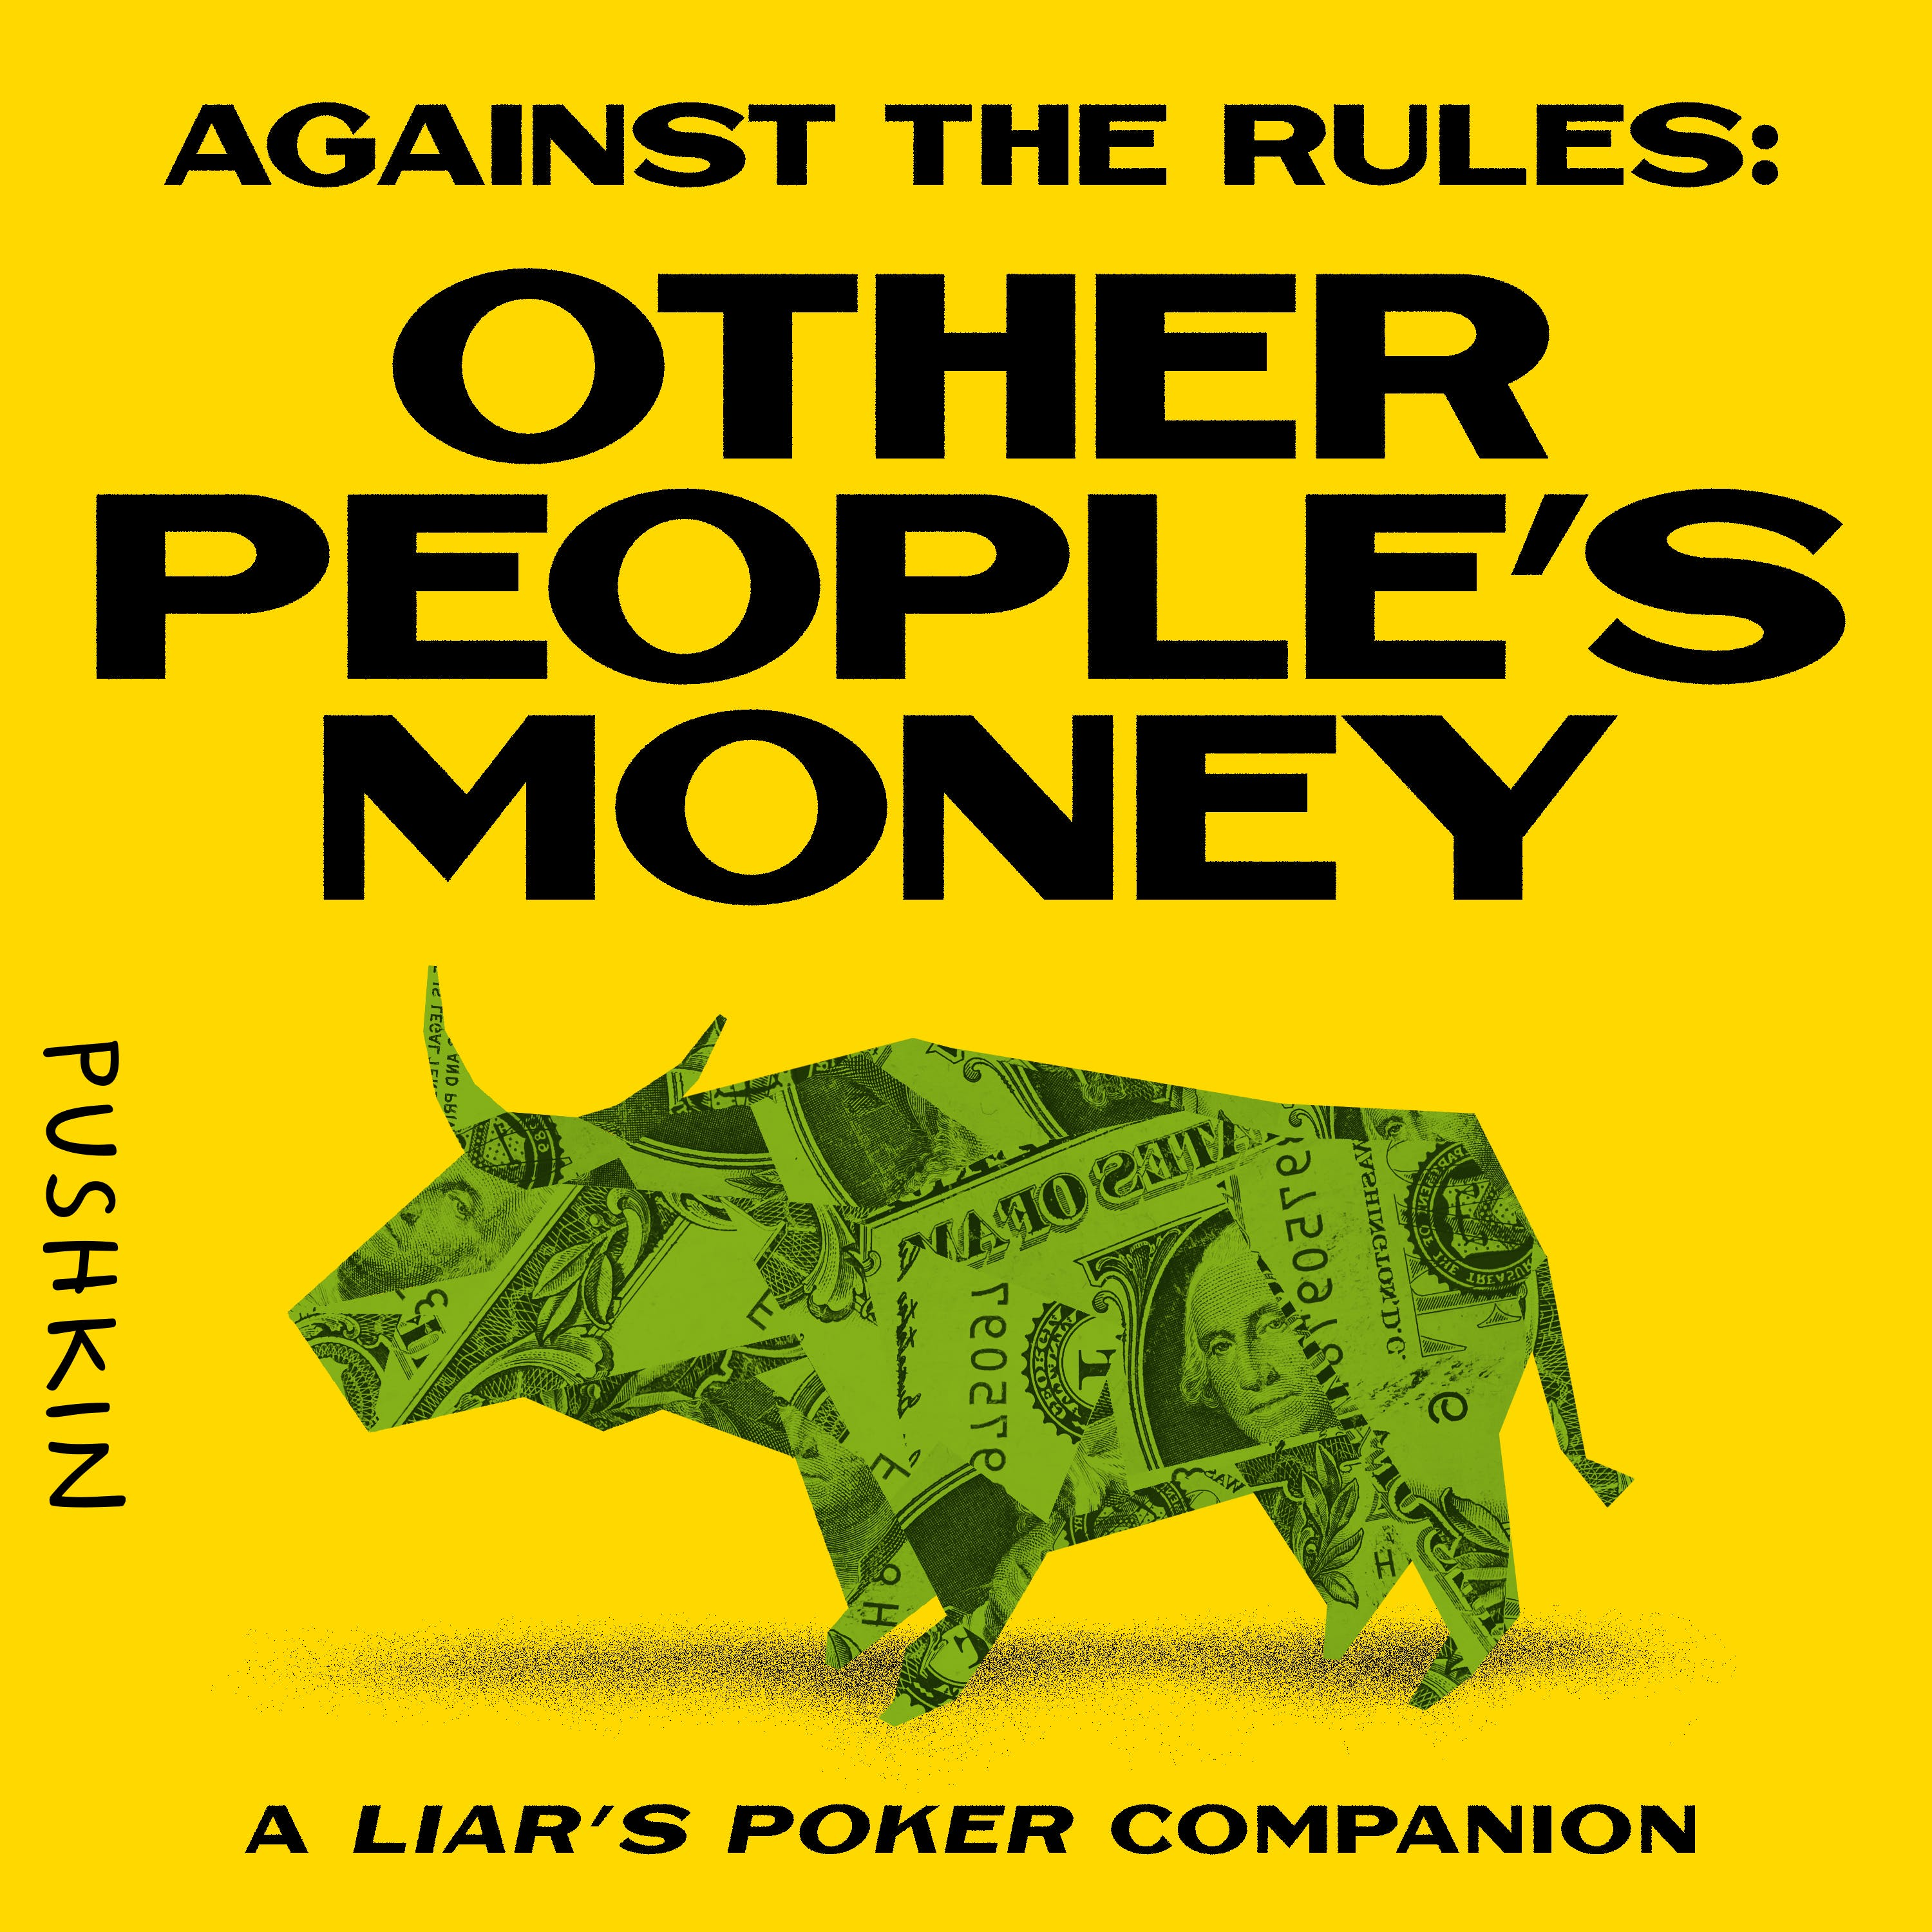 Introducing Other People’s Money: A Liar’s Poker Companion